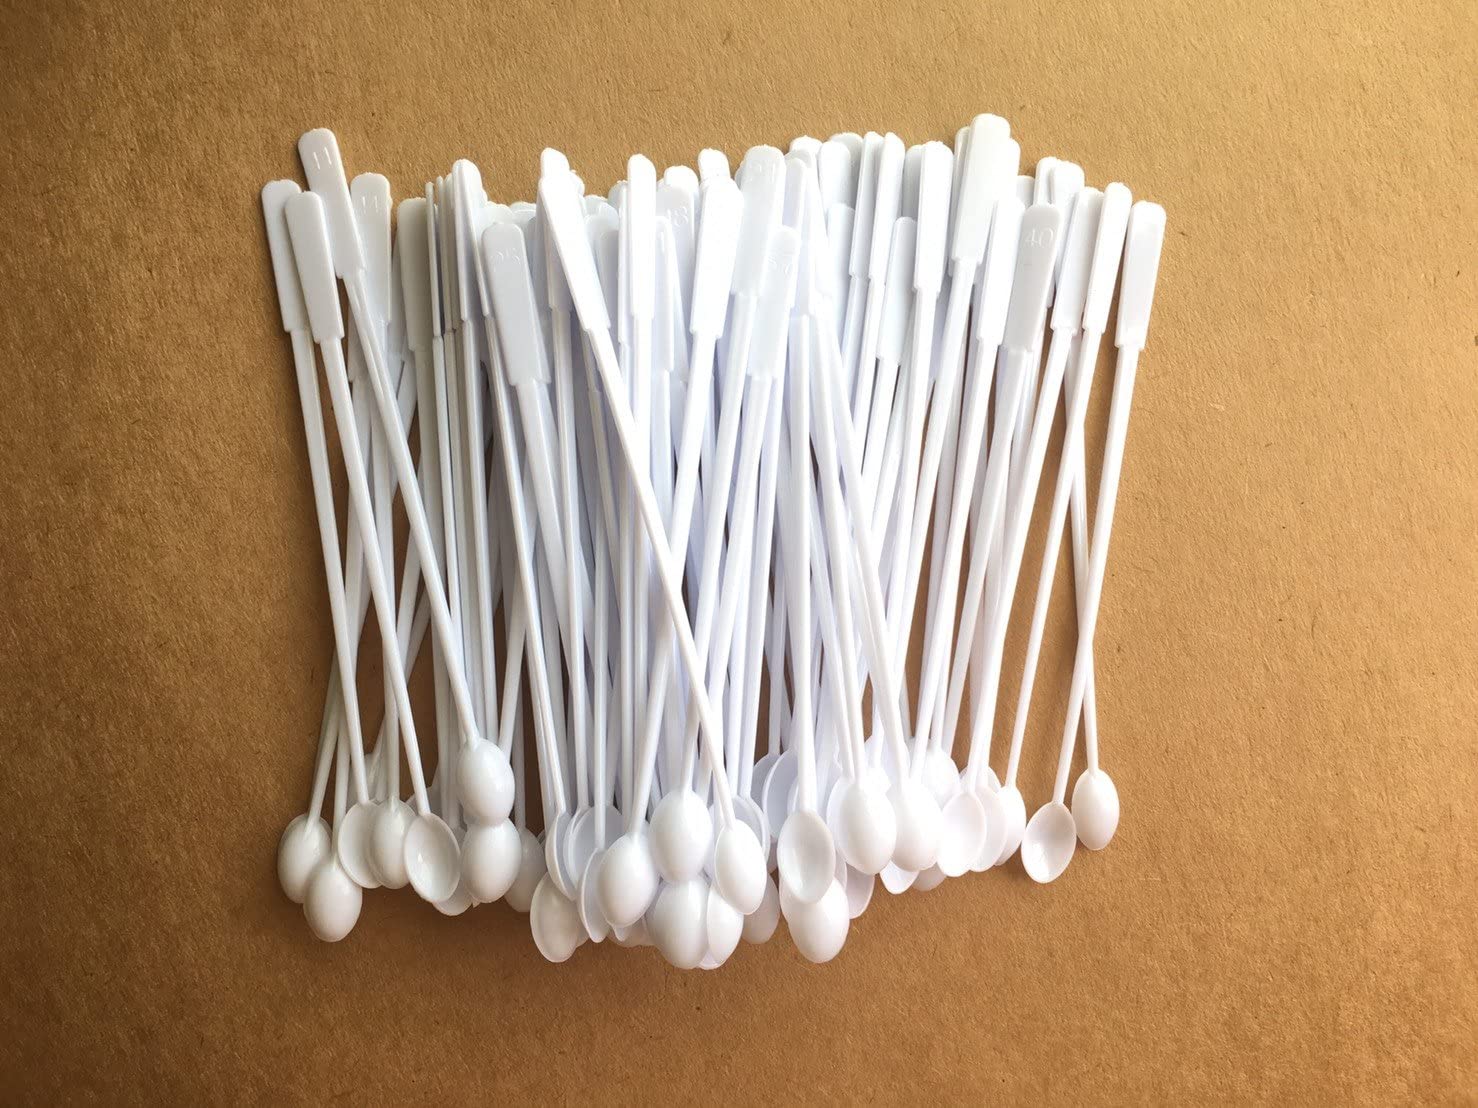 (200) ICRAFY White Plastic Coffee Stirrer Cocktail Stick Soft Drink White Color Pack Size 5.5″